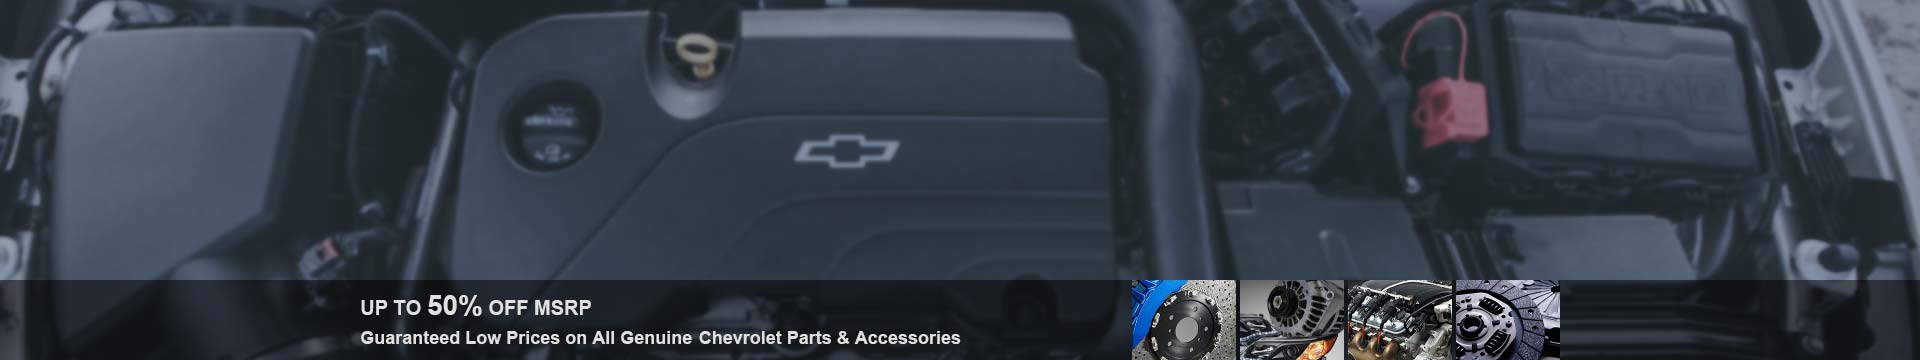 Guaranteed low prices on all Genuine Chevrolet P30 parts